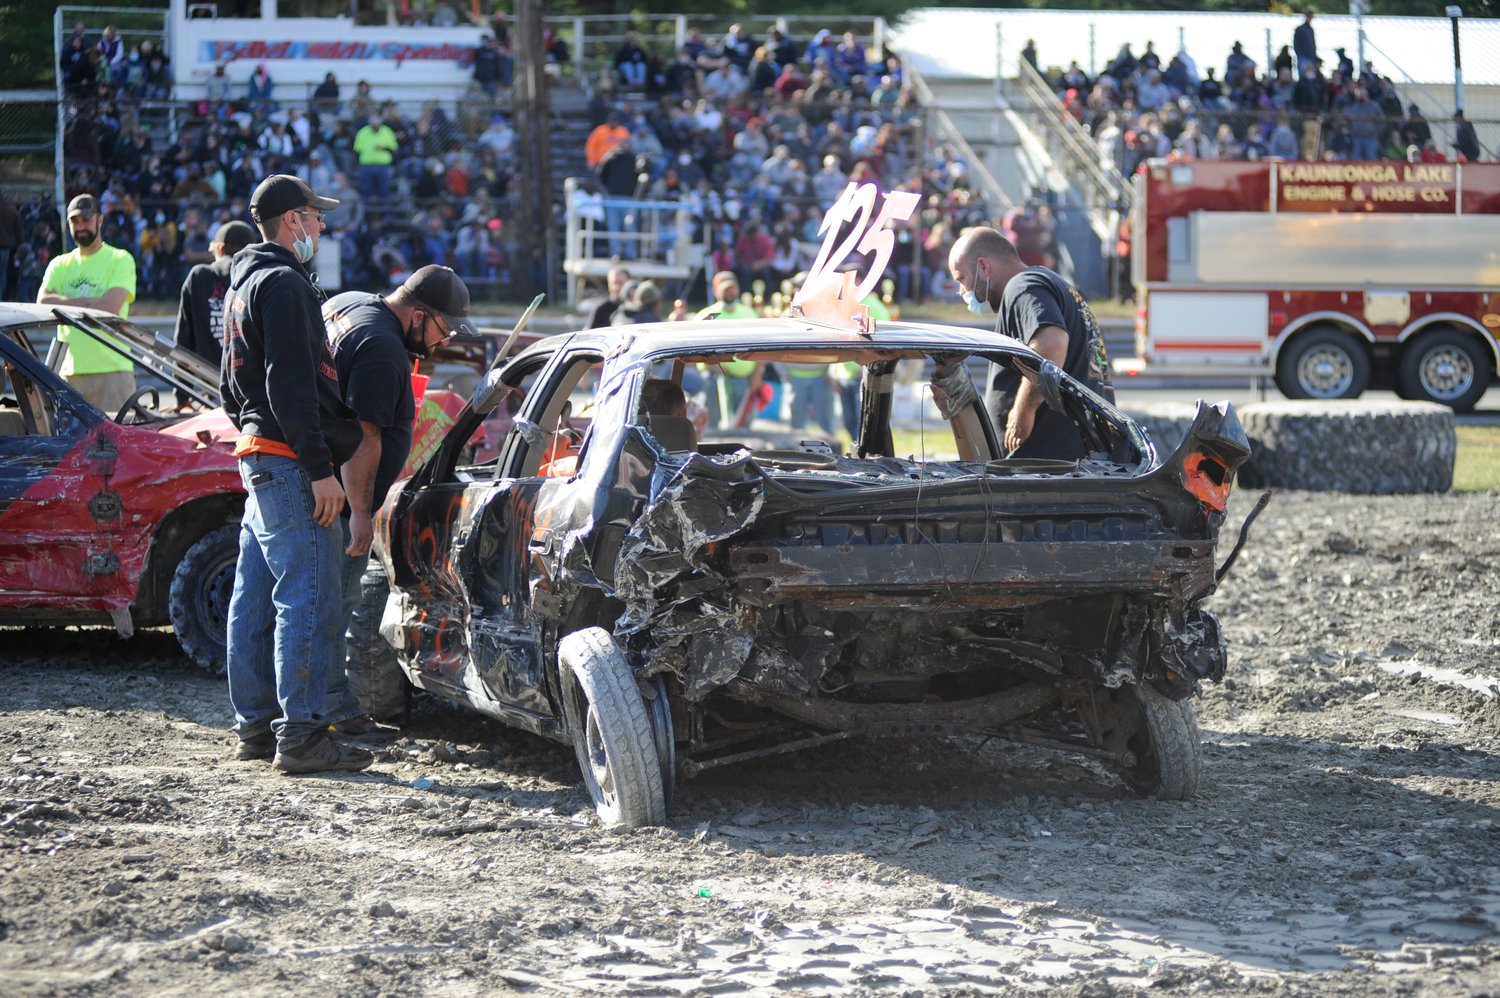 Yeah, but does it have cruise control? Demo drivers inspect what’s left after an event.